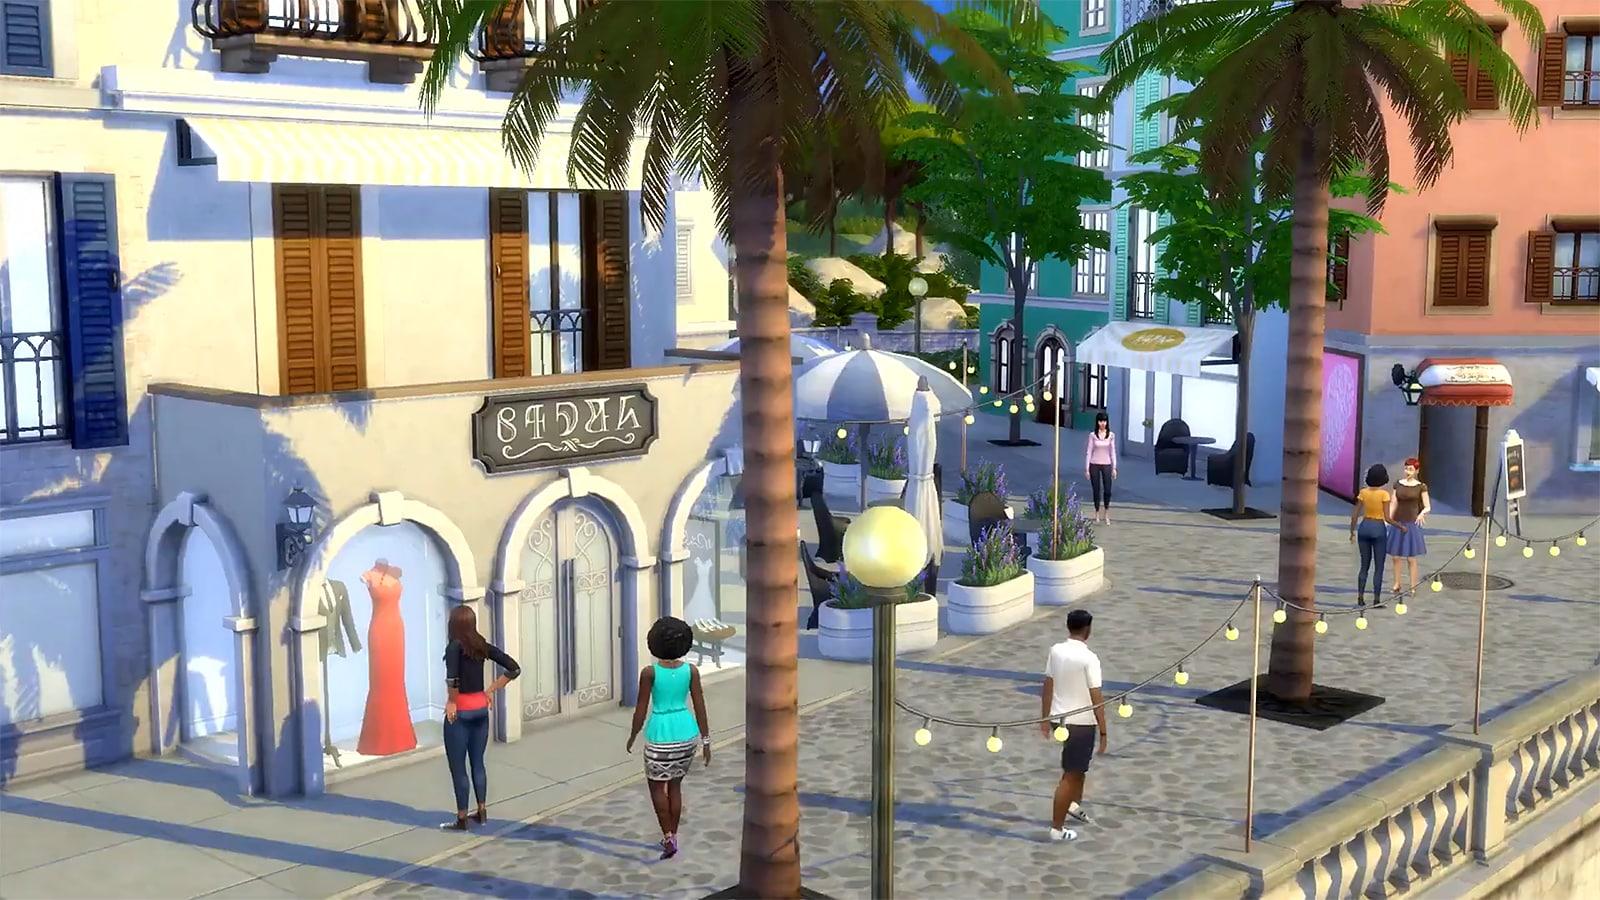 A profaned with shops in The Sims 4's new world, Tartosa